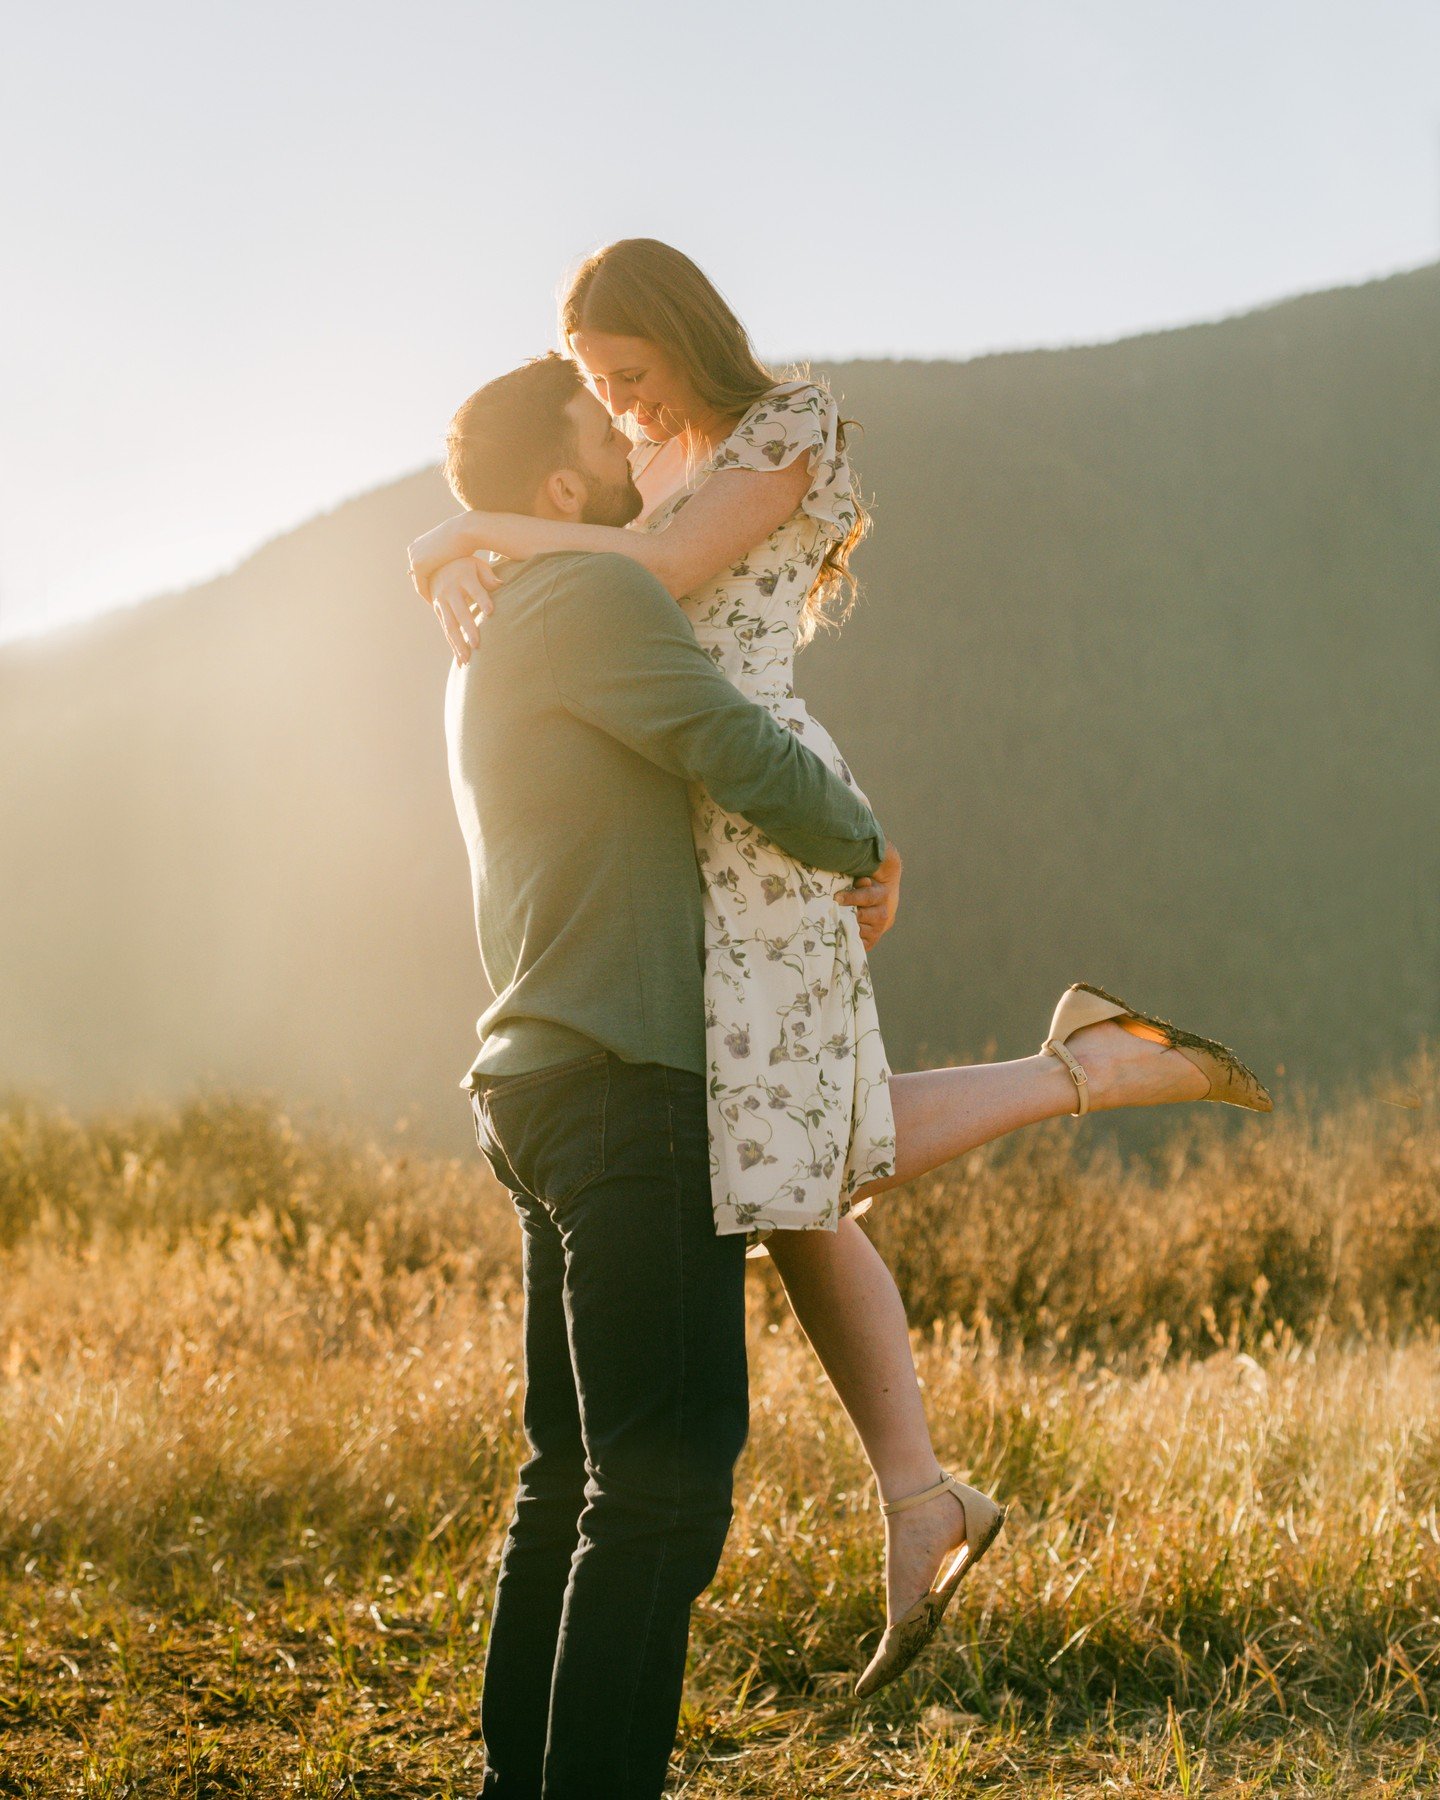 The last ray of sunshine and my favourite moment from Jillian and Nick's engagement shoot. 

So excited with how this whole set turned out, I will definitely be sharing more soon! 😍

#yayloveweddingphotography
#vancouverweddingphotographer